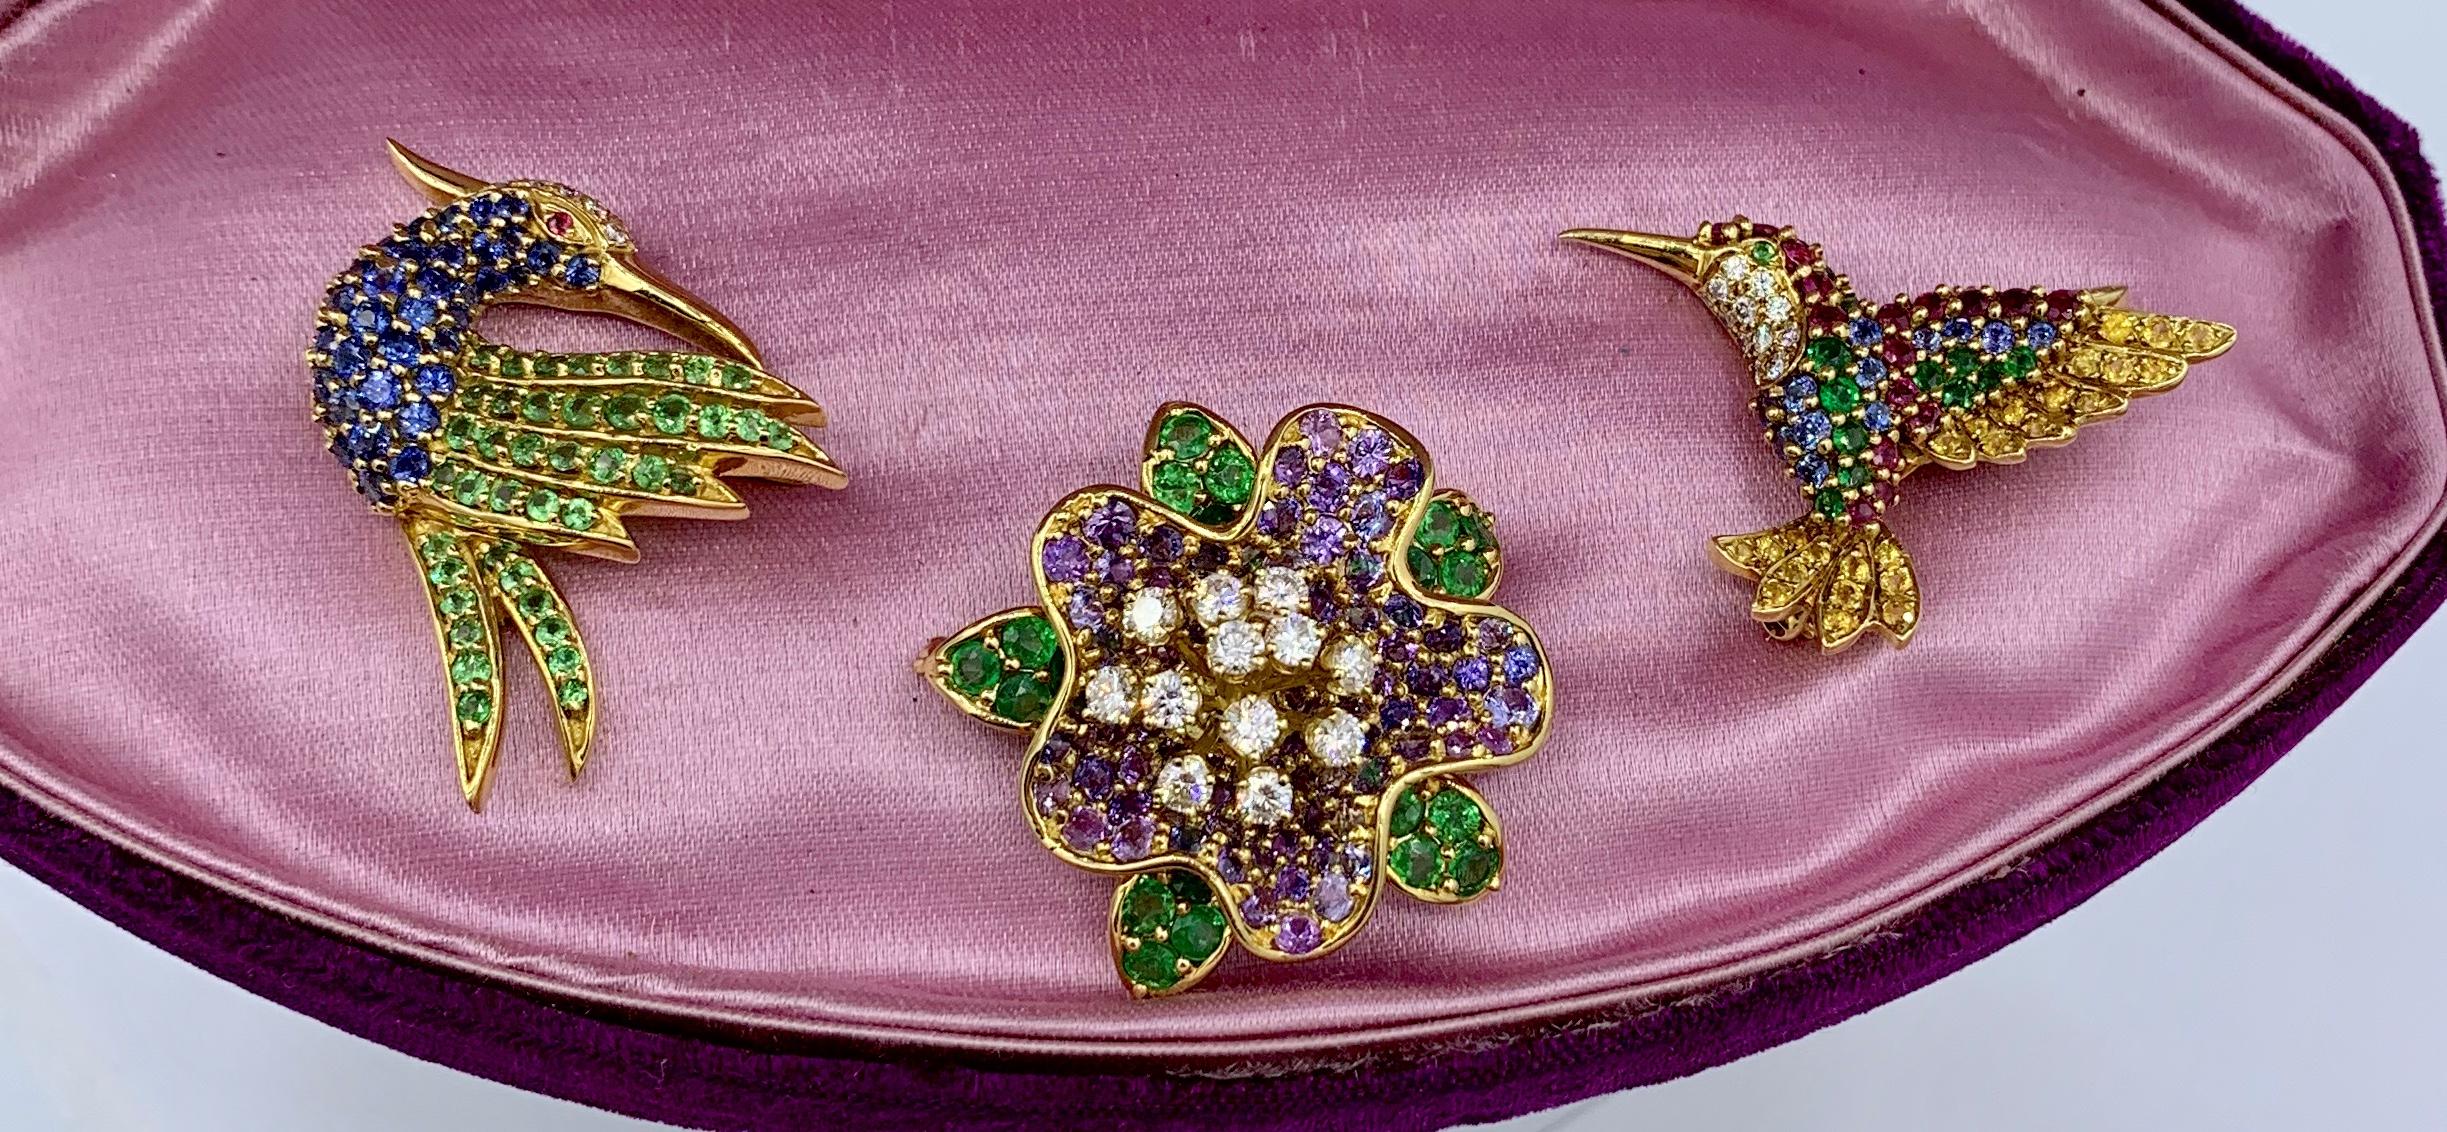 This is a trio of three signed Jean Vitau Brooch Pins with a Flower and two Birds, Hummingbird, set with Sapphires, Diamonds, Tsavorite Green Garnets, Yellow Sapphires, Rubies, and Purple Sapphires and in 18 Karat Gold.
The three jewels by the famed